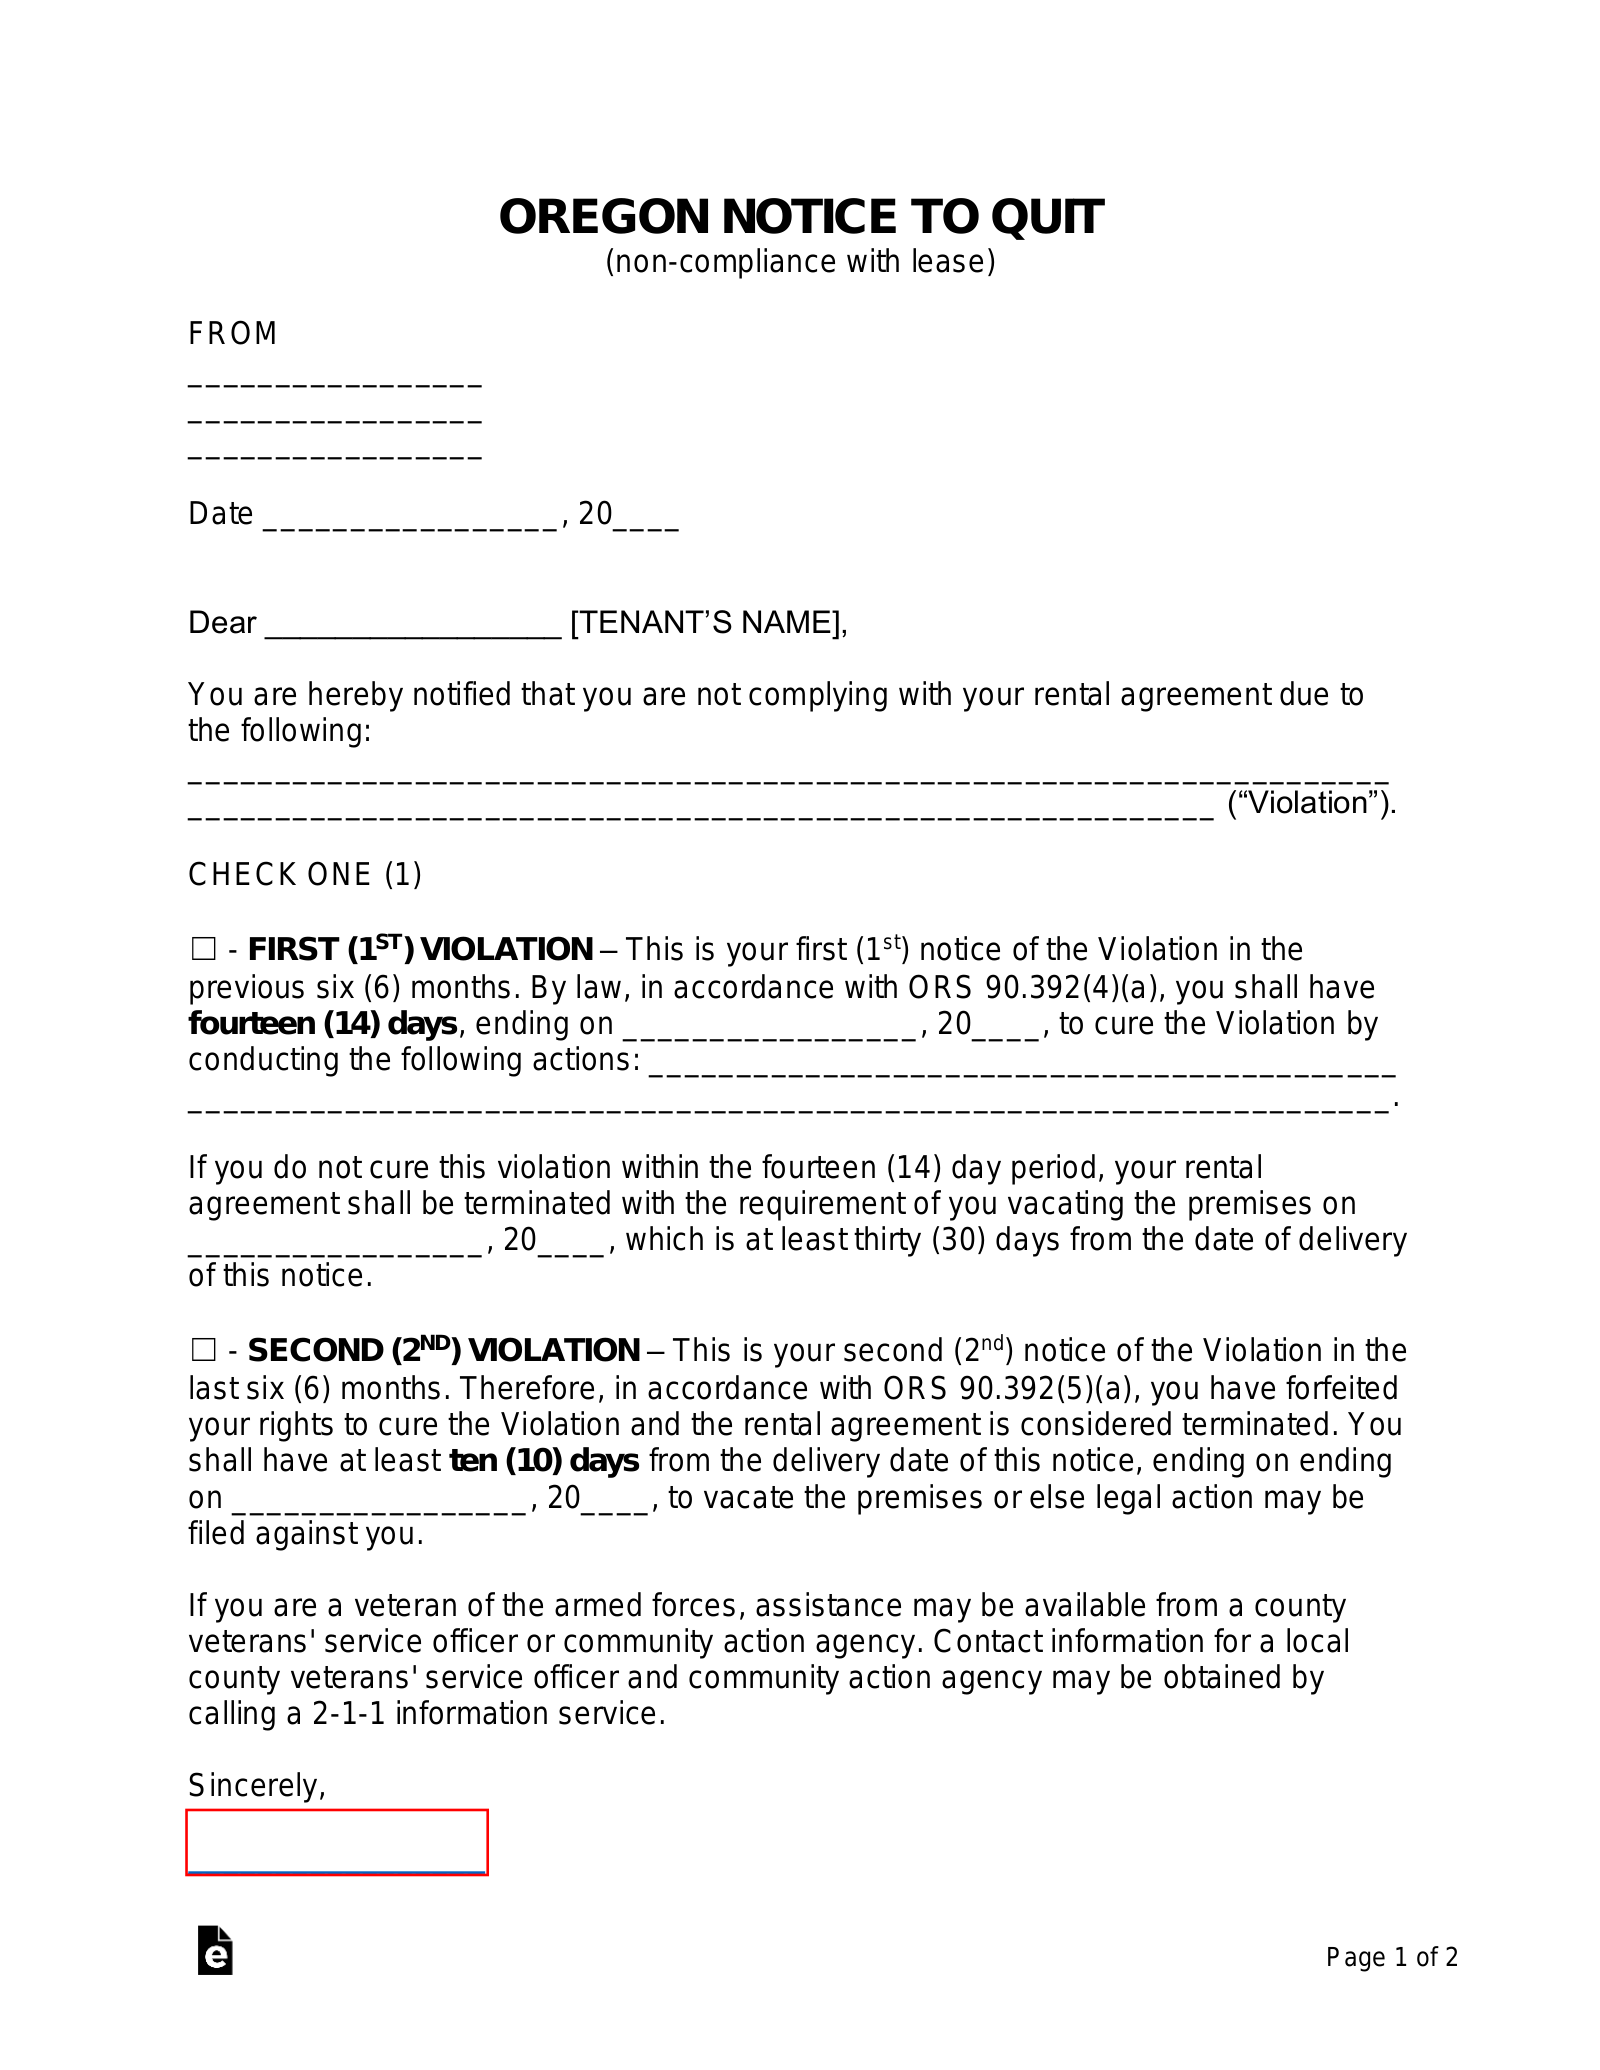 free-oregon-10-14-day-notice-to-quit-form-non-compliance-pdf-word